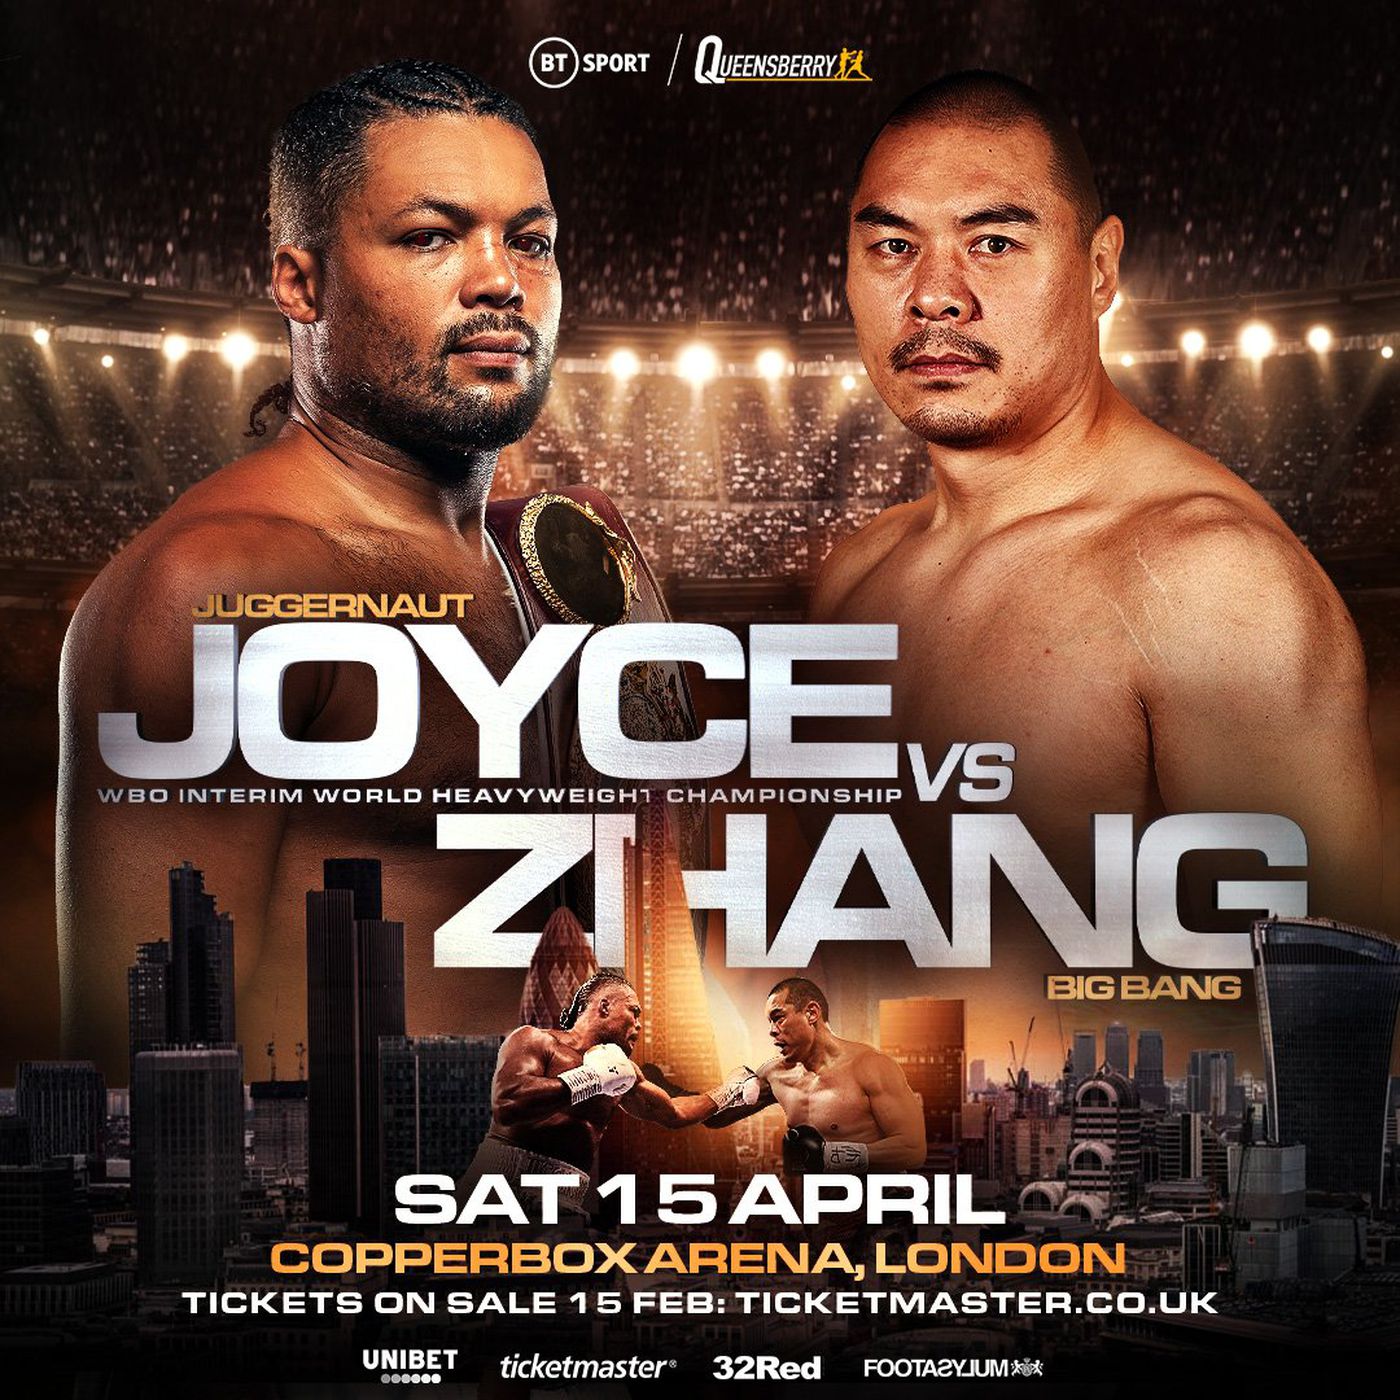 The following guide shows how to stream Joe Joyce vs. Zhilei Zhang fight on any device.